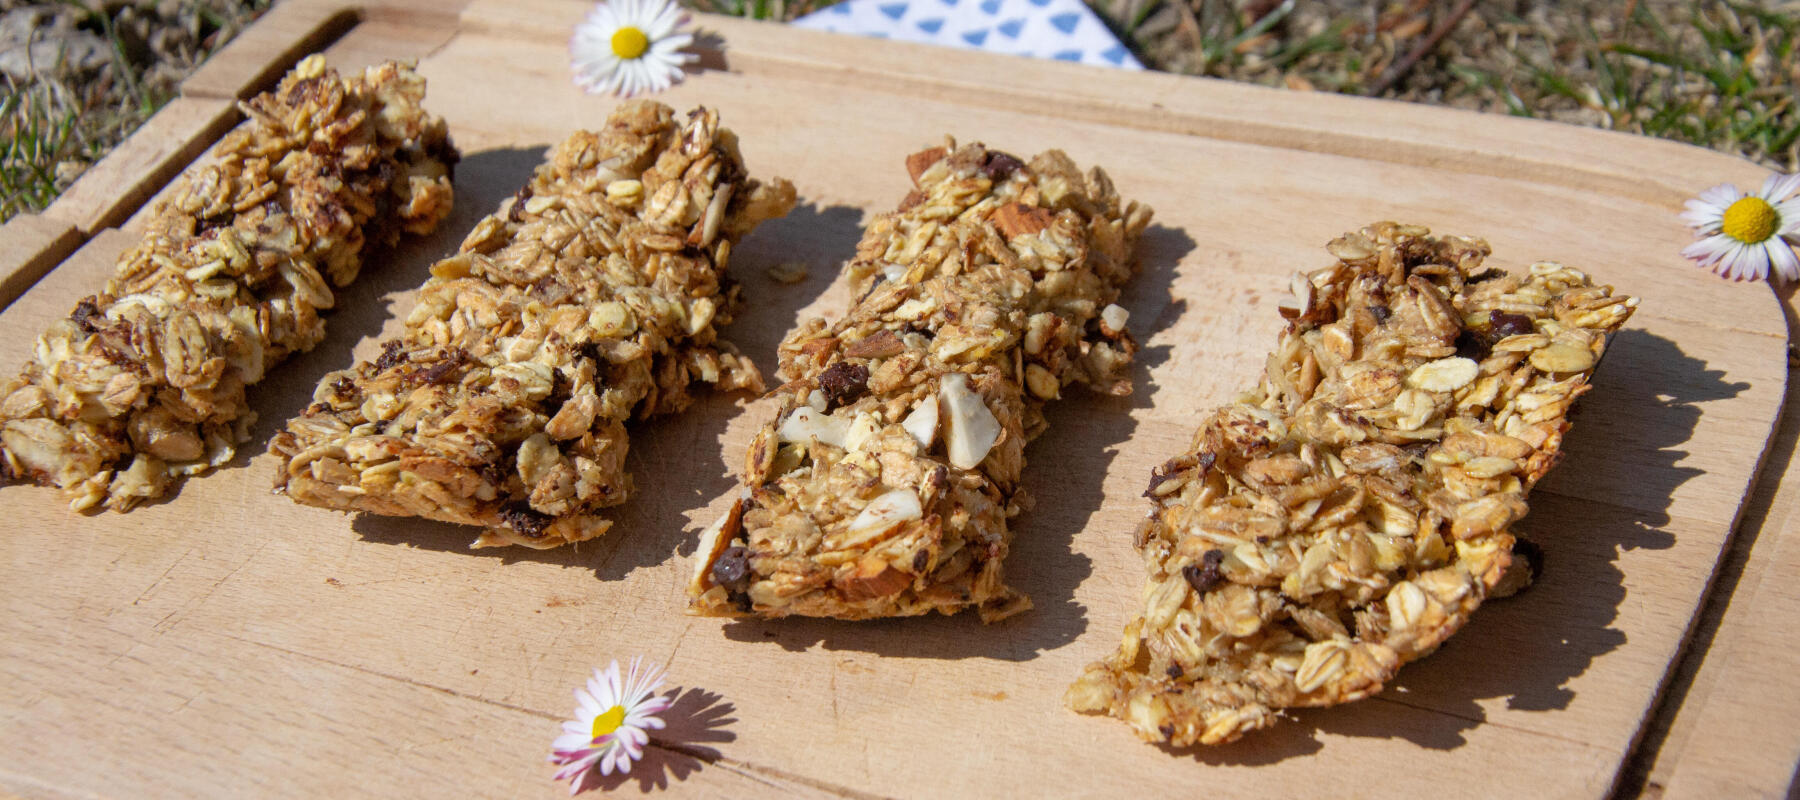 Recipe: Make your own cereal bars